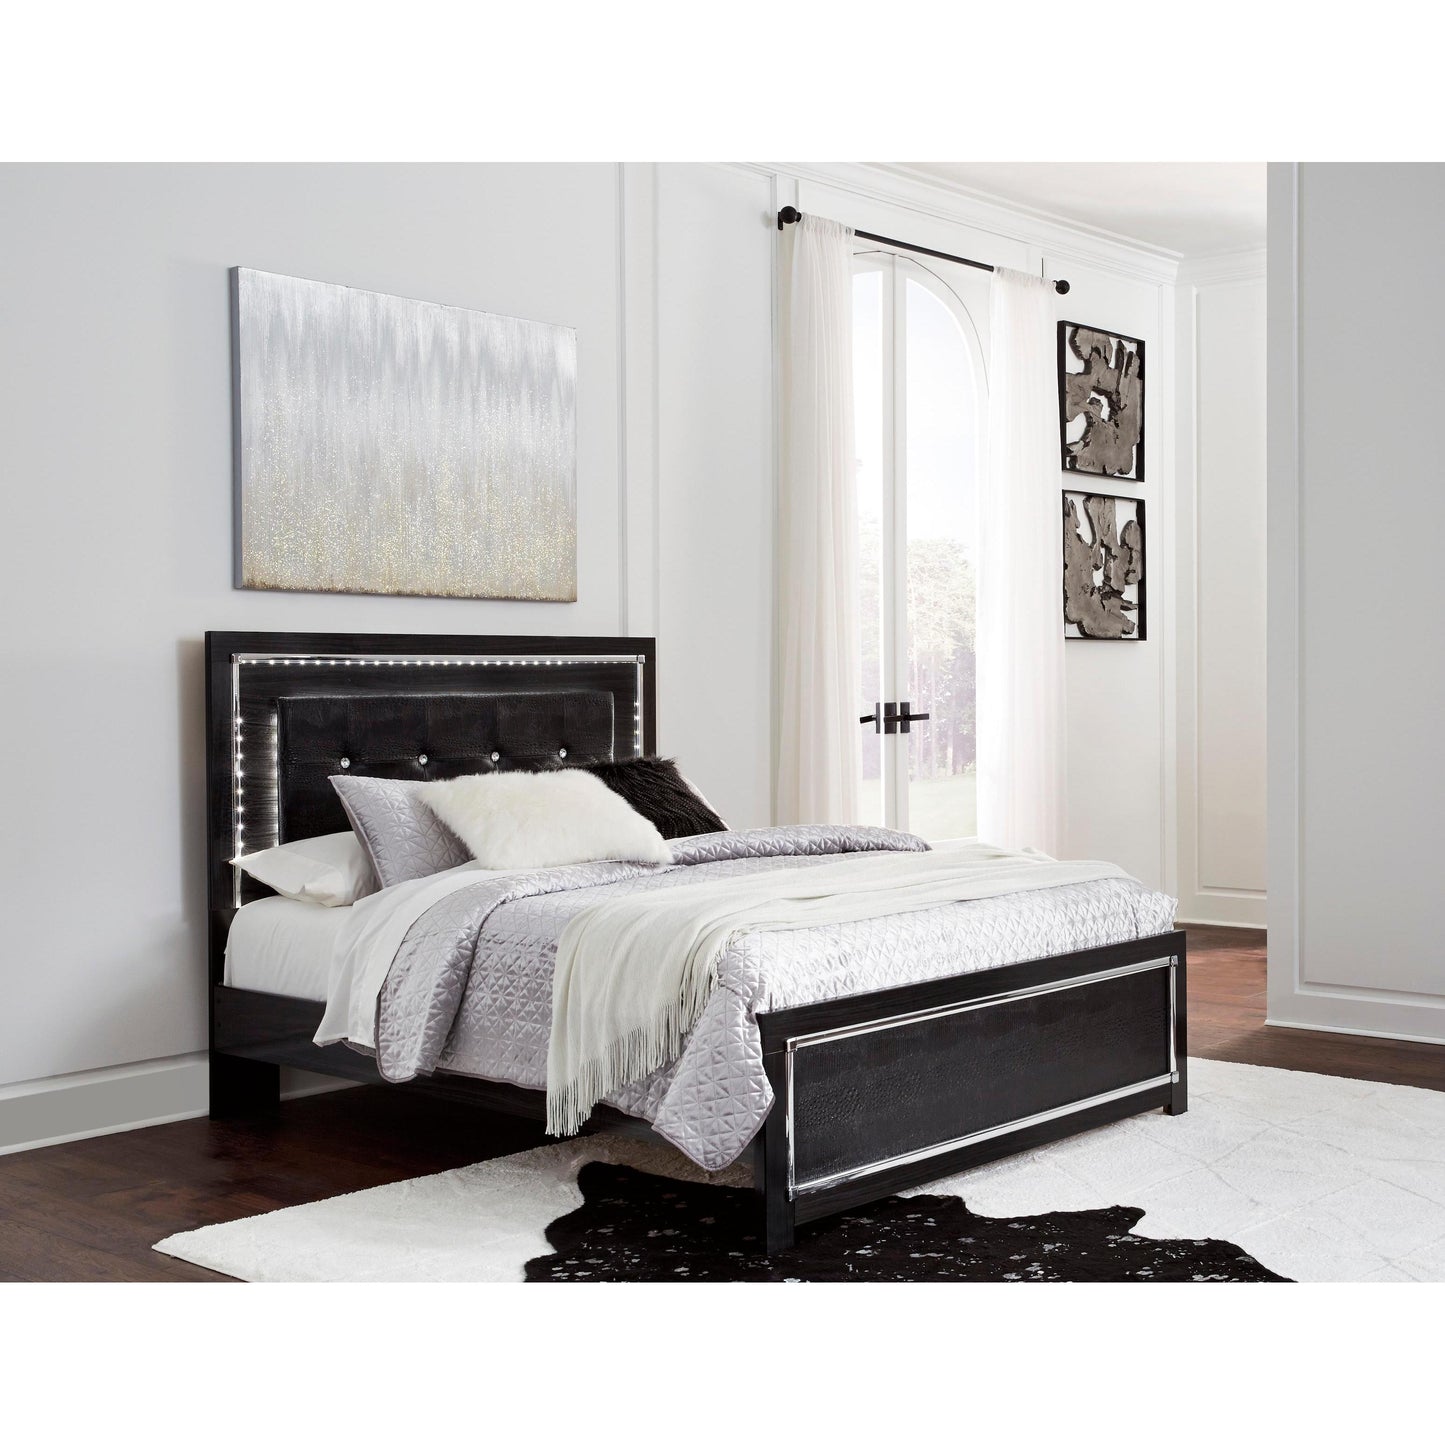 Signature Design by Ashley Kaydell B1420B34 6 pc Queen Panel Bedroom Set IMAGE 2